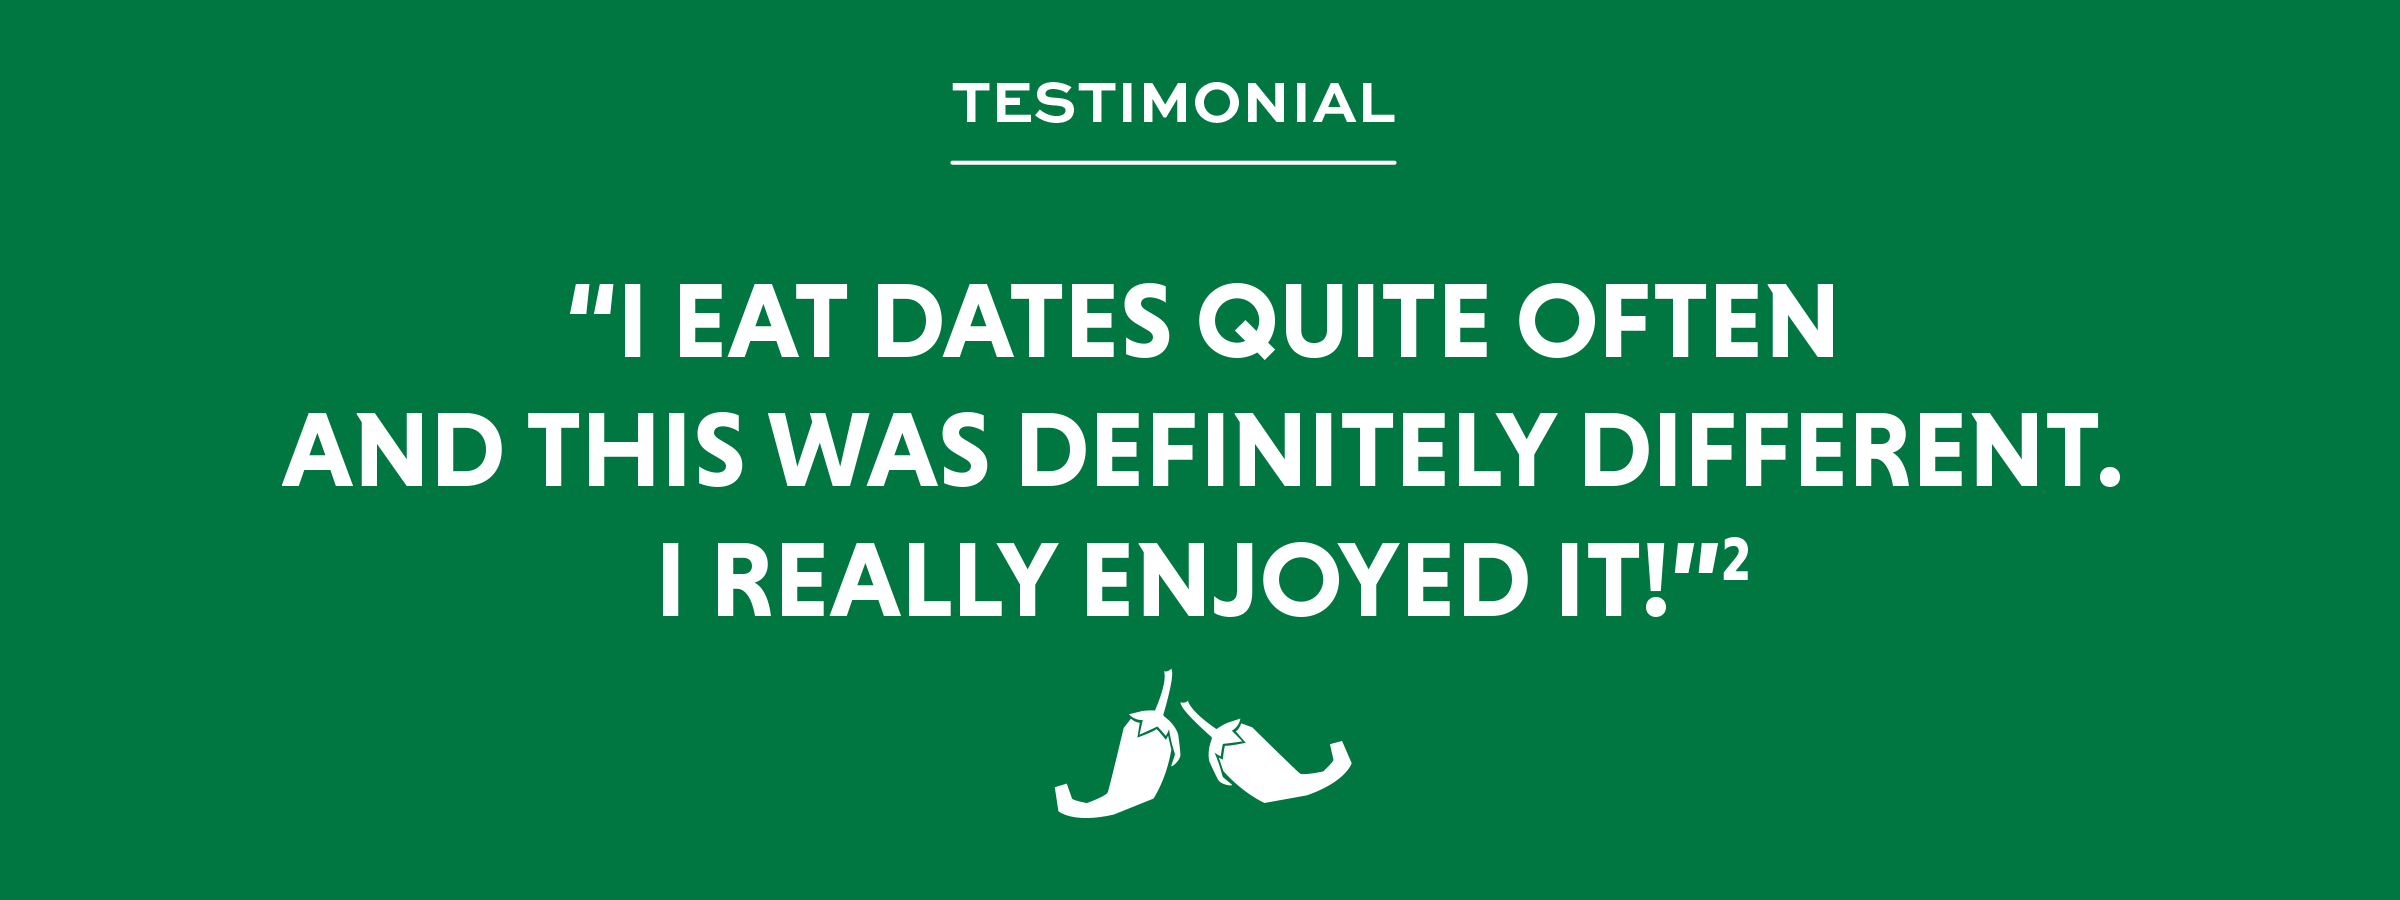 Testimonial: I eat dates quite often and this was definitely different. I really enjoyed it!(2)